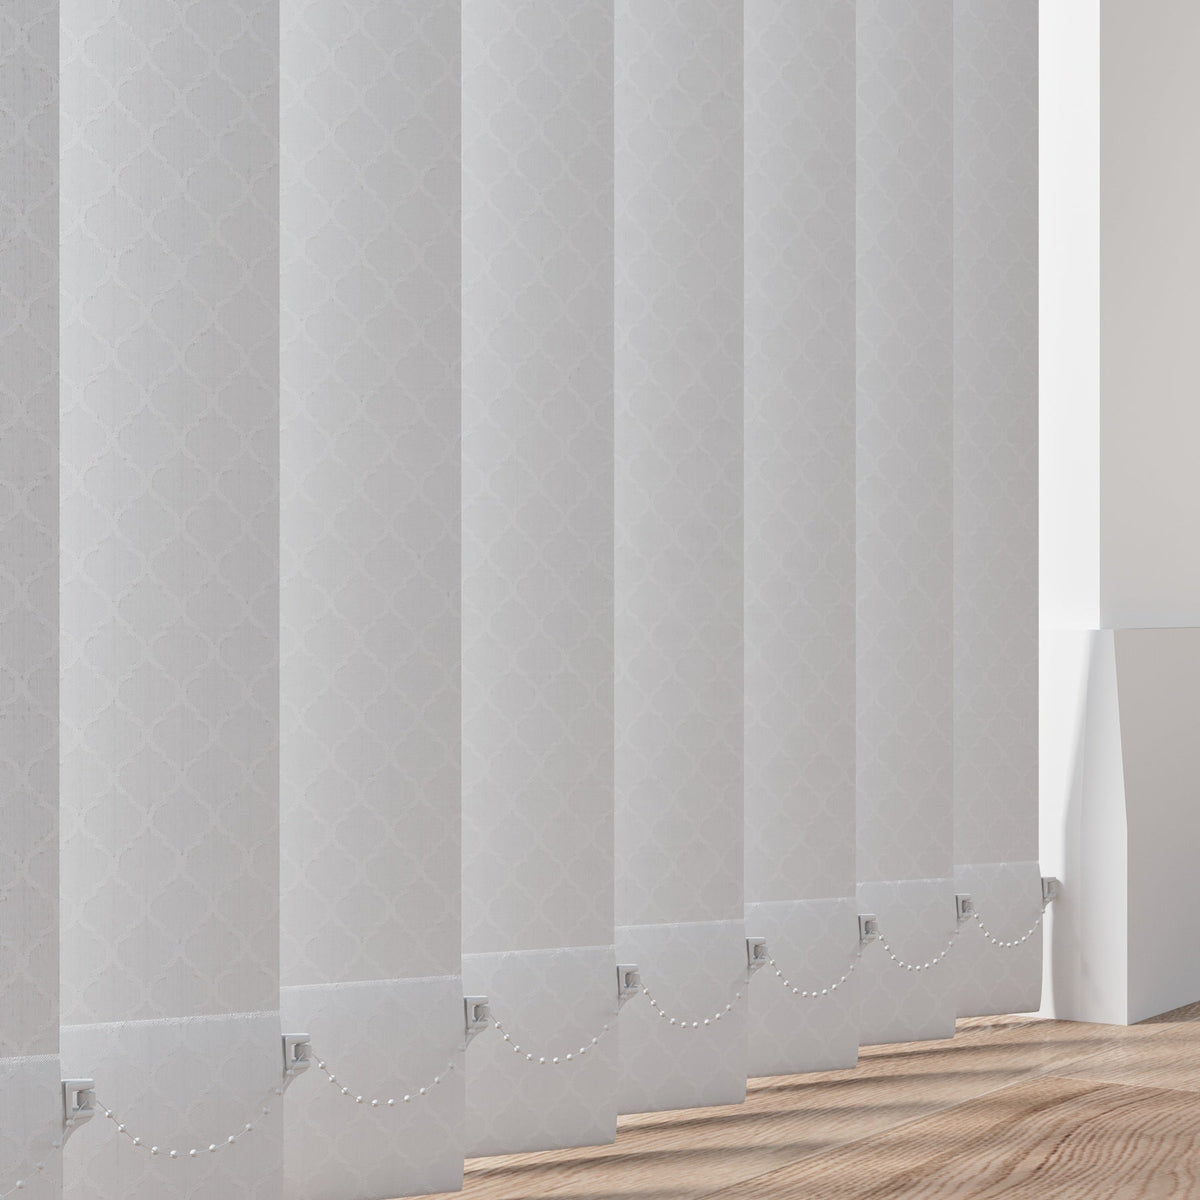 Sorrento White Vertical Replacement Blind Slat